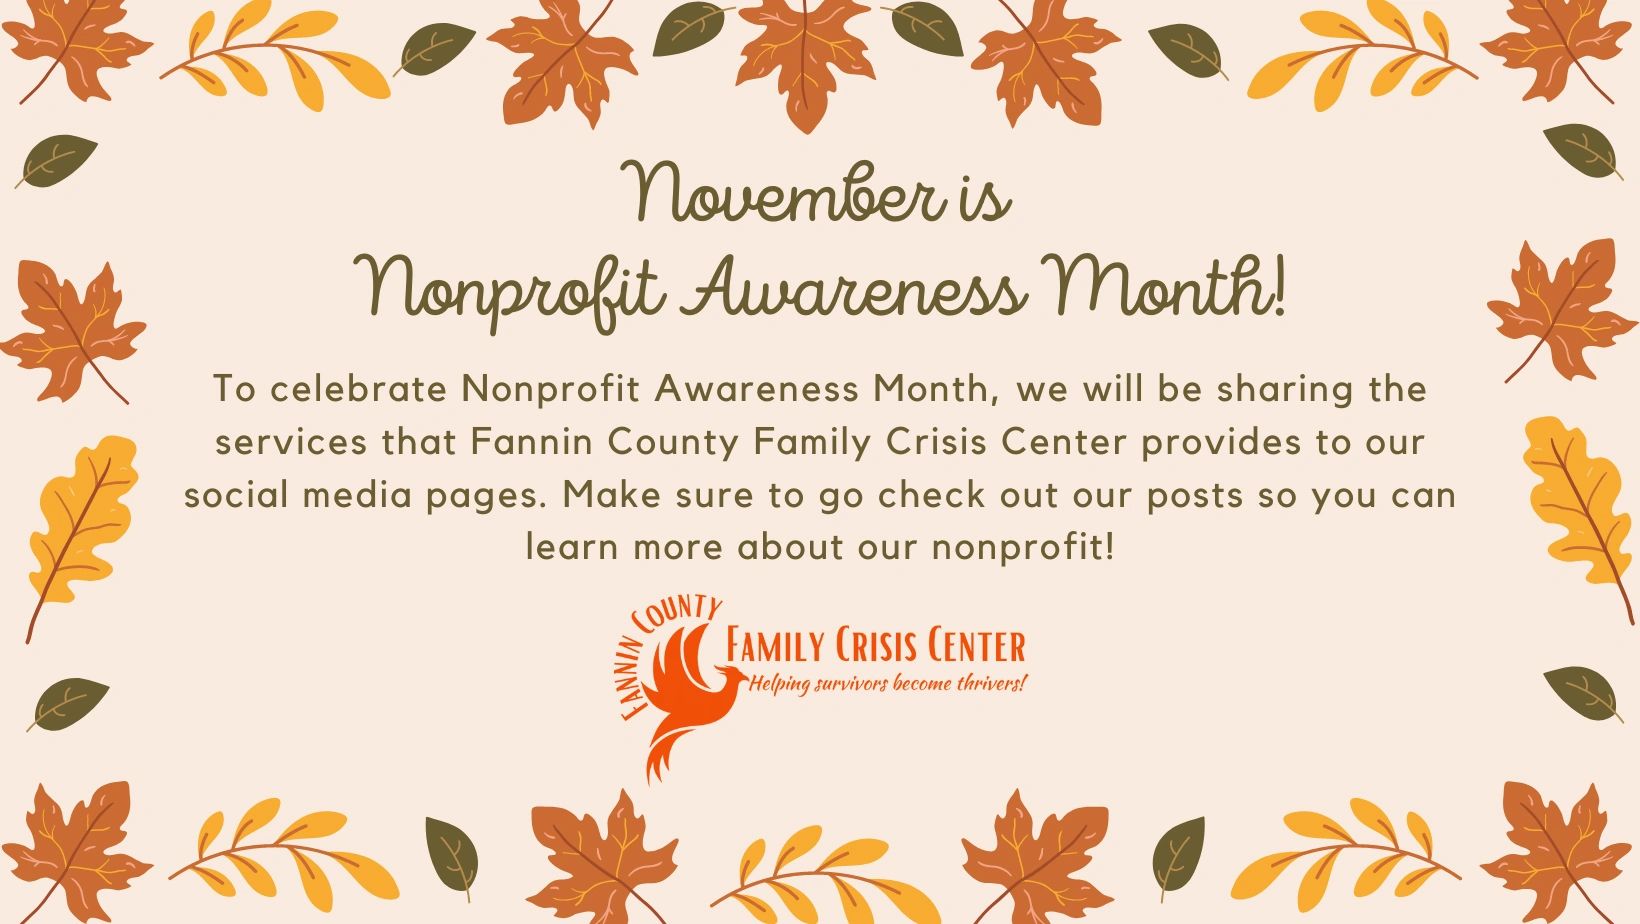 November is Nonprofit Awareness Month!
Learn more about our services on our social media pages.